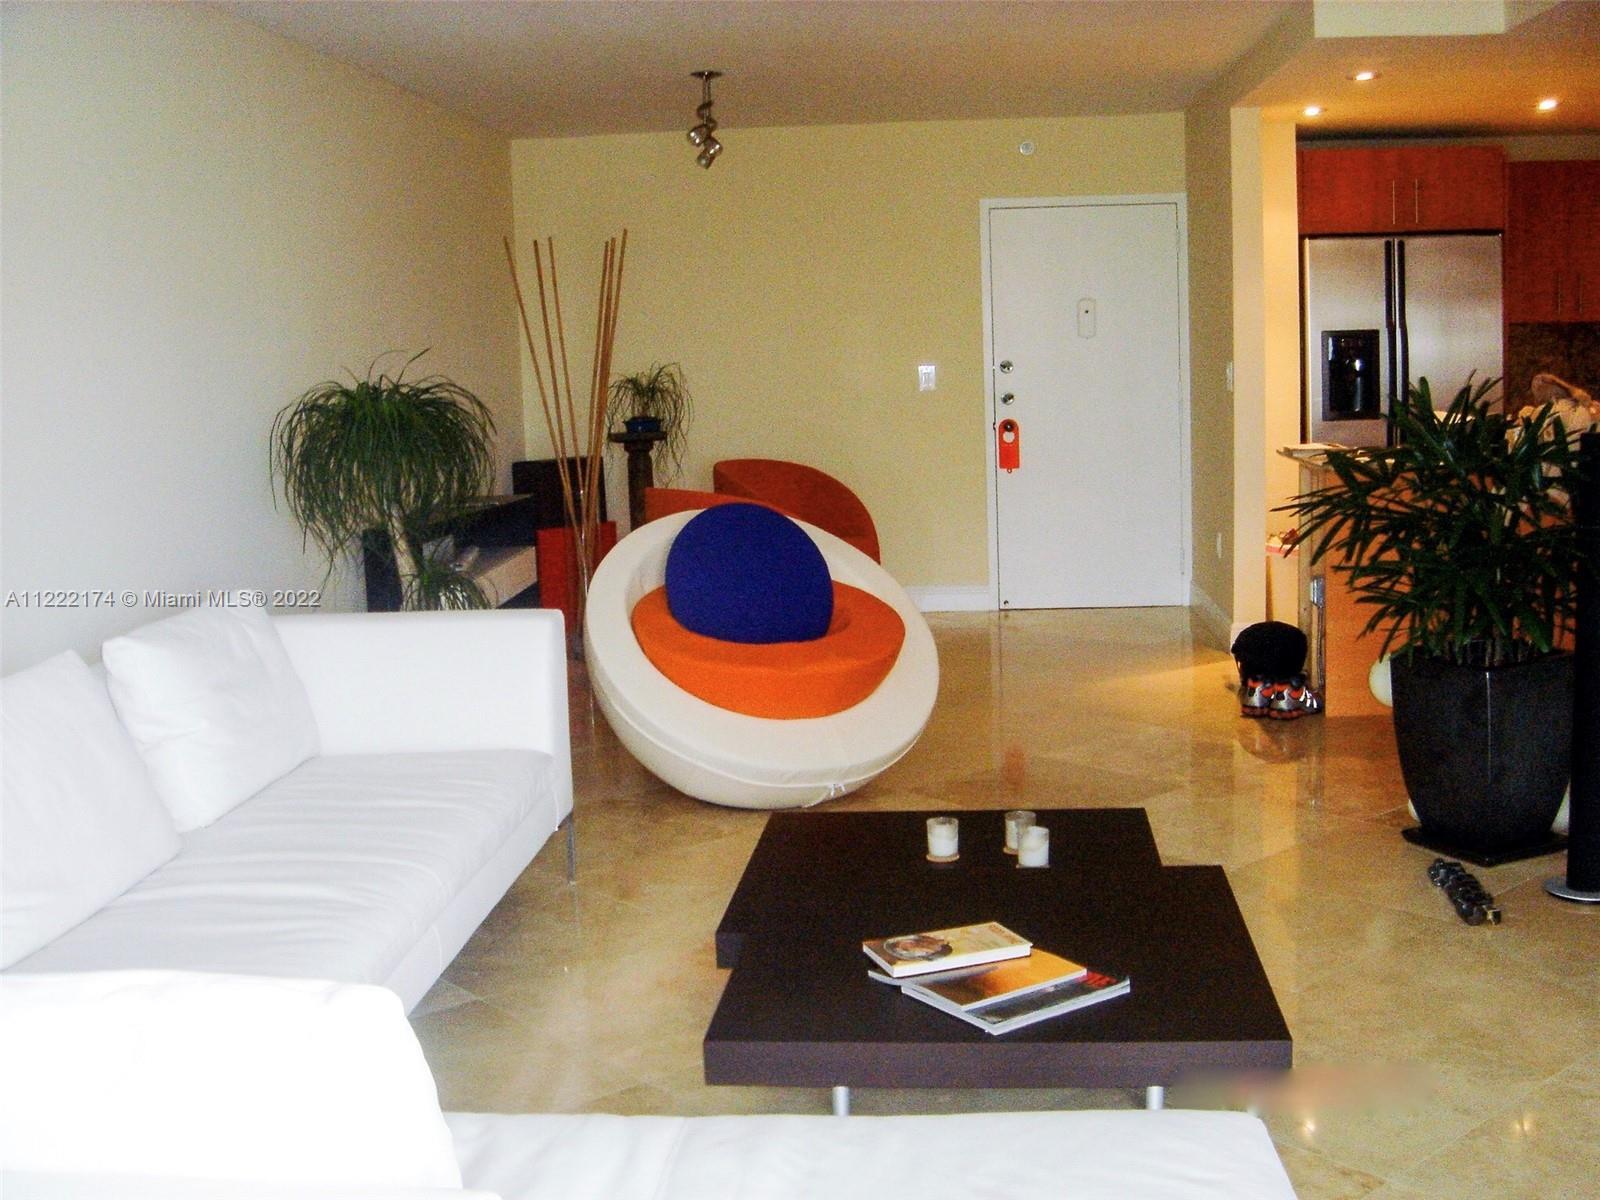 BEAUTIFUL MODERN APARTMENT, GREAT LOCATION BY WILLIAMS ISLAND, 2BD 2 BTH MARBLE FLOORS THROUGHOUT, O